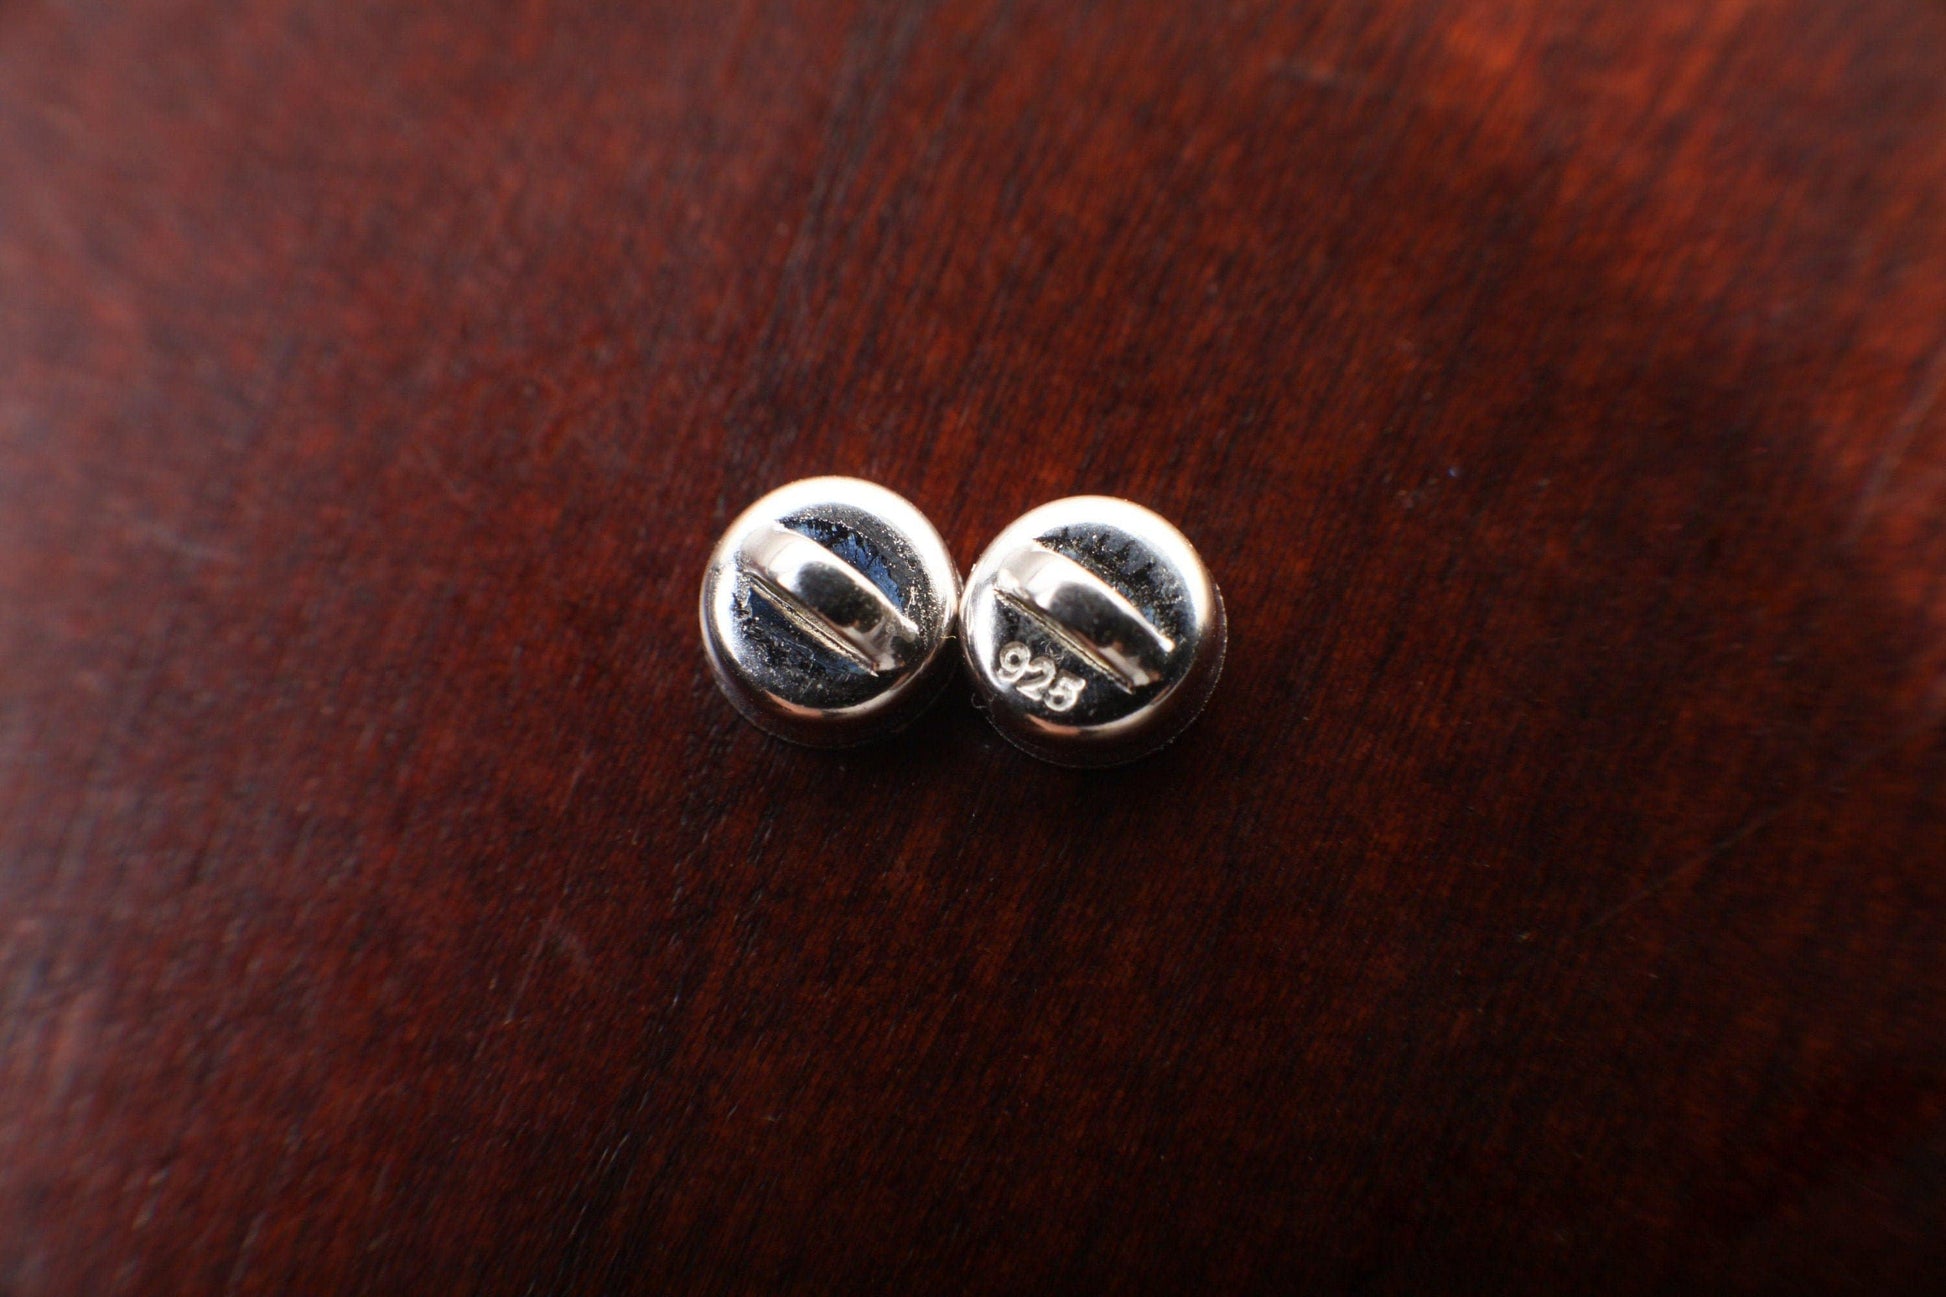 Magnetic Button Clasp 6mm, 925 Sterling Silver, DIY Jewelry Making Findings, Strong Magnet, Beading Supplies